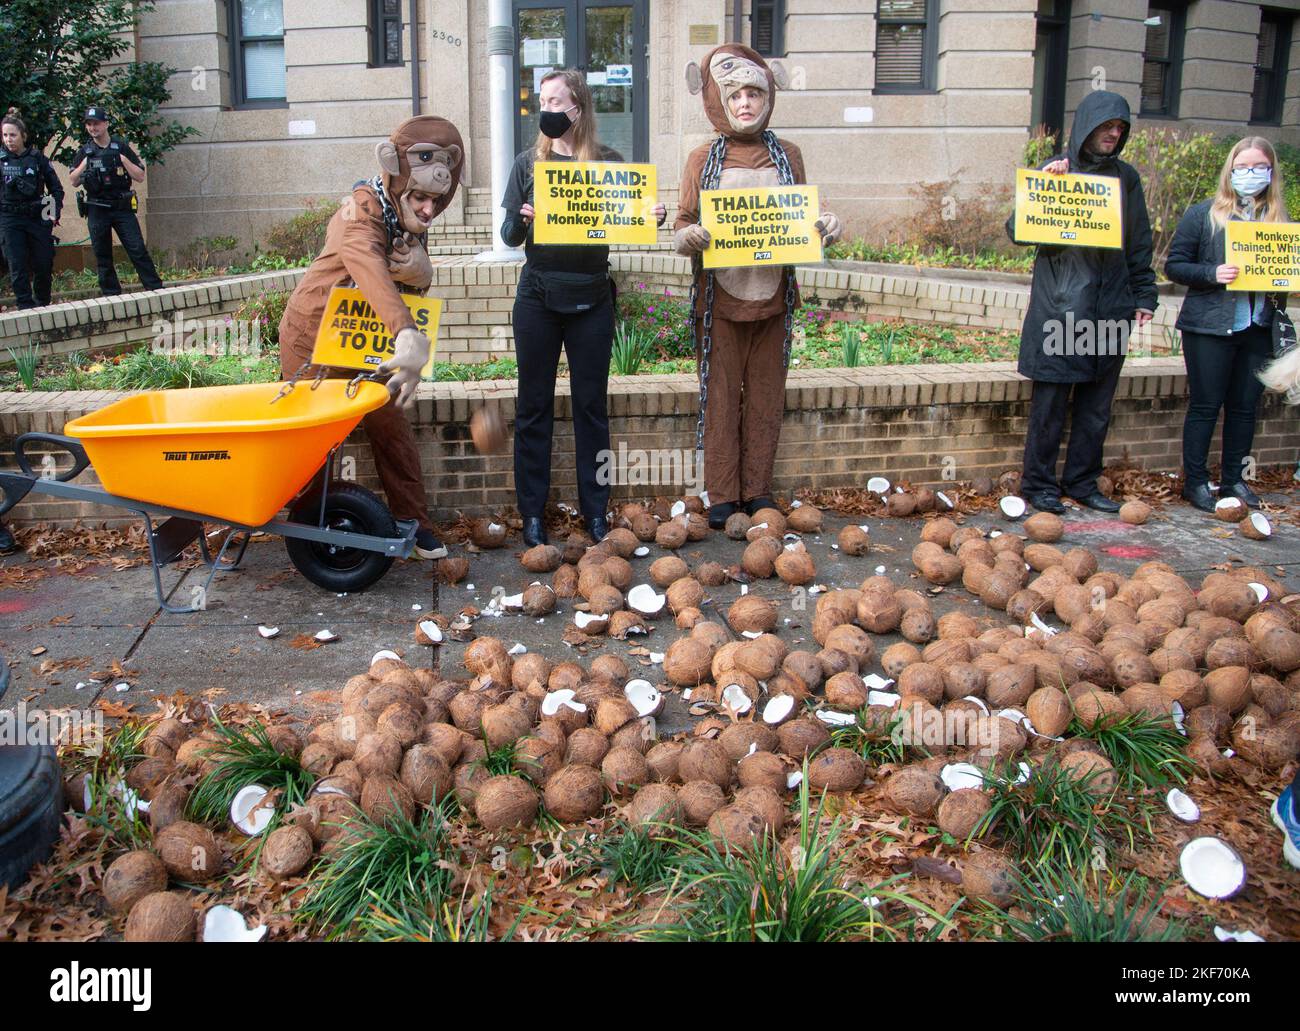 Washington DC, USA. 16th Nov, 2022. PETA protests at the Royal Thai Embassy in Washington DC to protest the use of monkeys that they claim are being used to pick coconuts. PETA activists dressed as monkeys dump coconuts in front of the embassy. November 16, 2022. Credit: Patsy Lynch/Media Punch/Alamy Live News Stock Photo